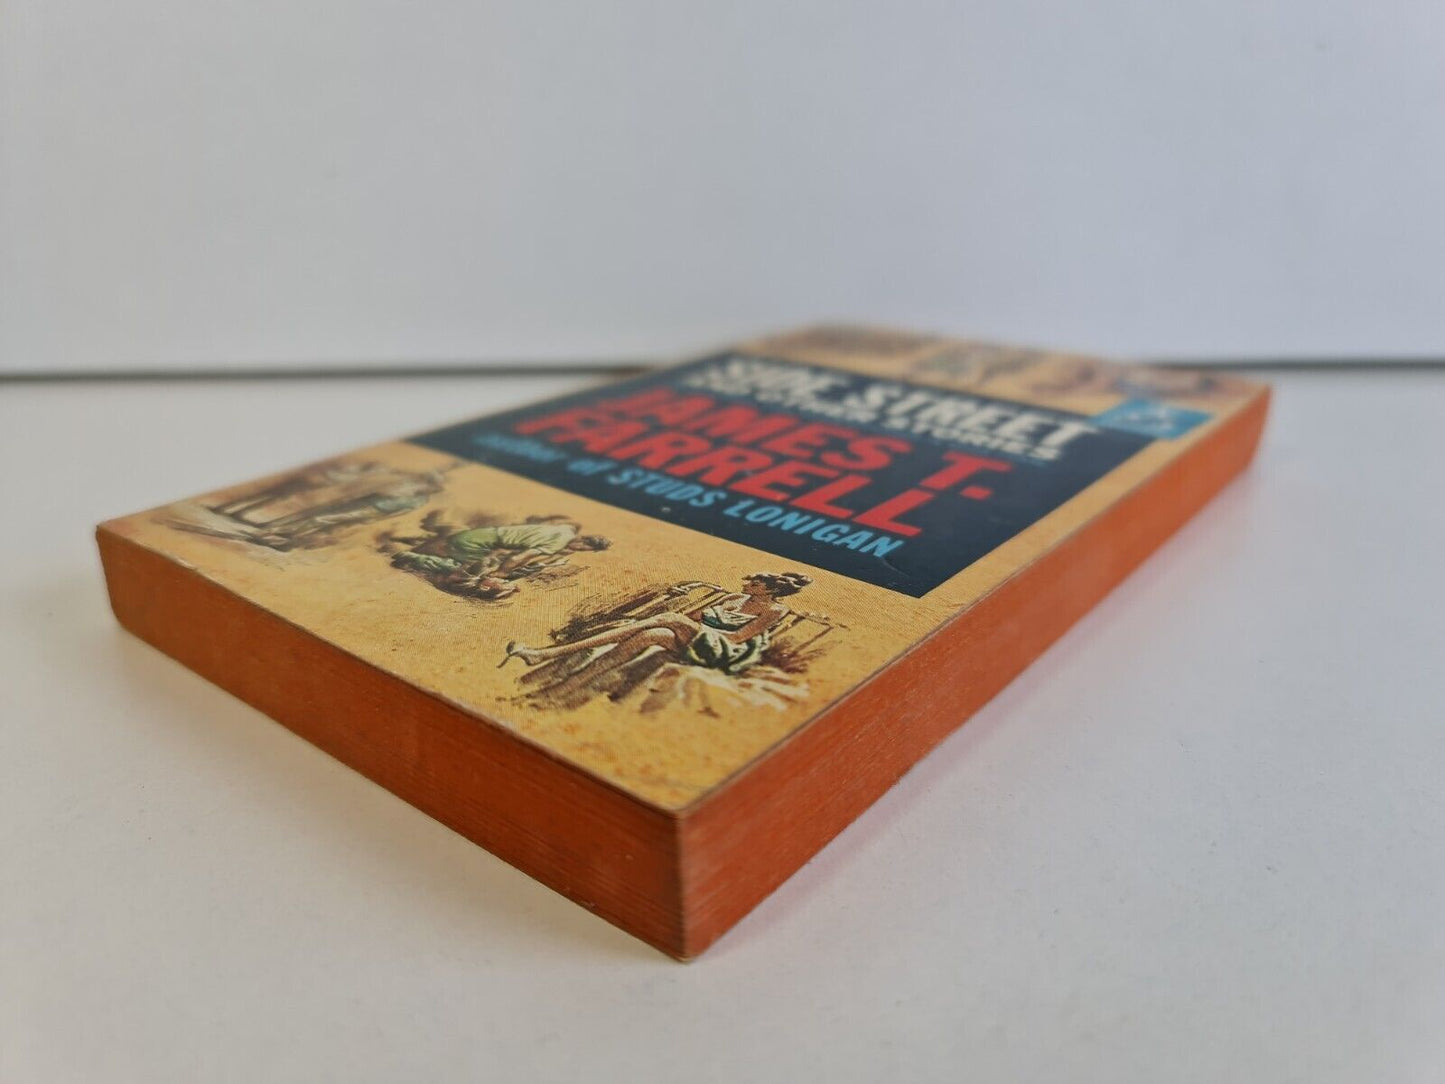 Side Street and Other Stories by James T Farrell (1961)